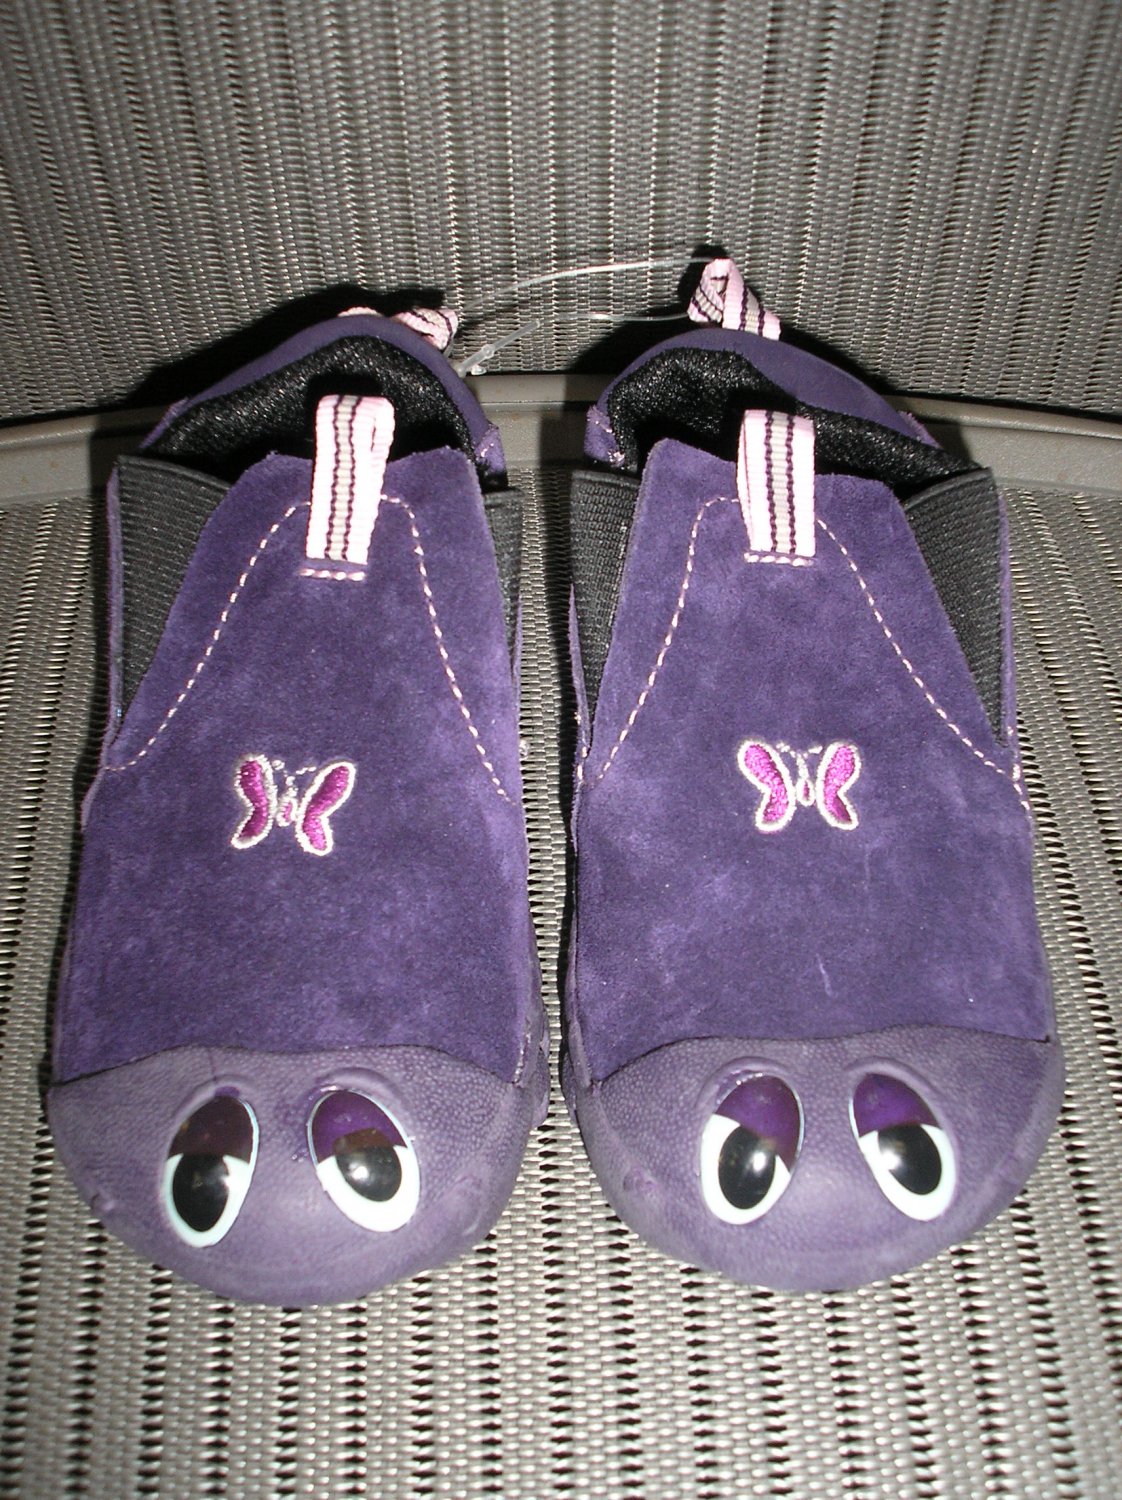 POLLIWALKS KIDS "TOYS FOR FEET" PURPLE ELASTIC SLIP ON with SUEDE UPPER - SIZE 8 - BRAND NEW!